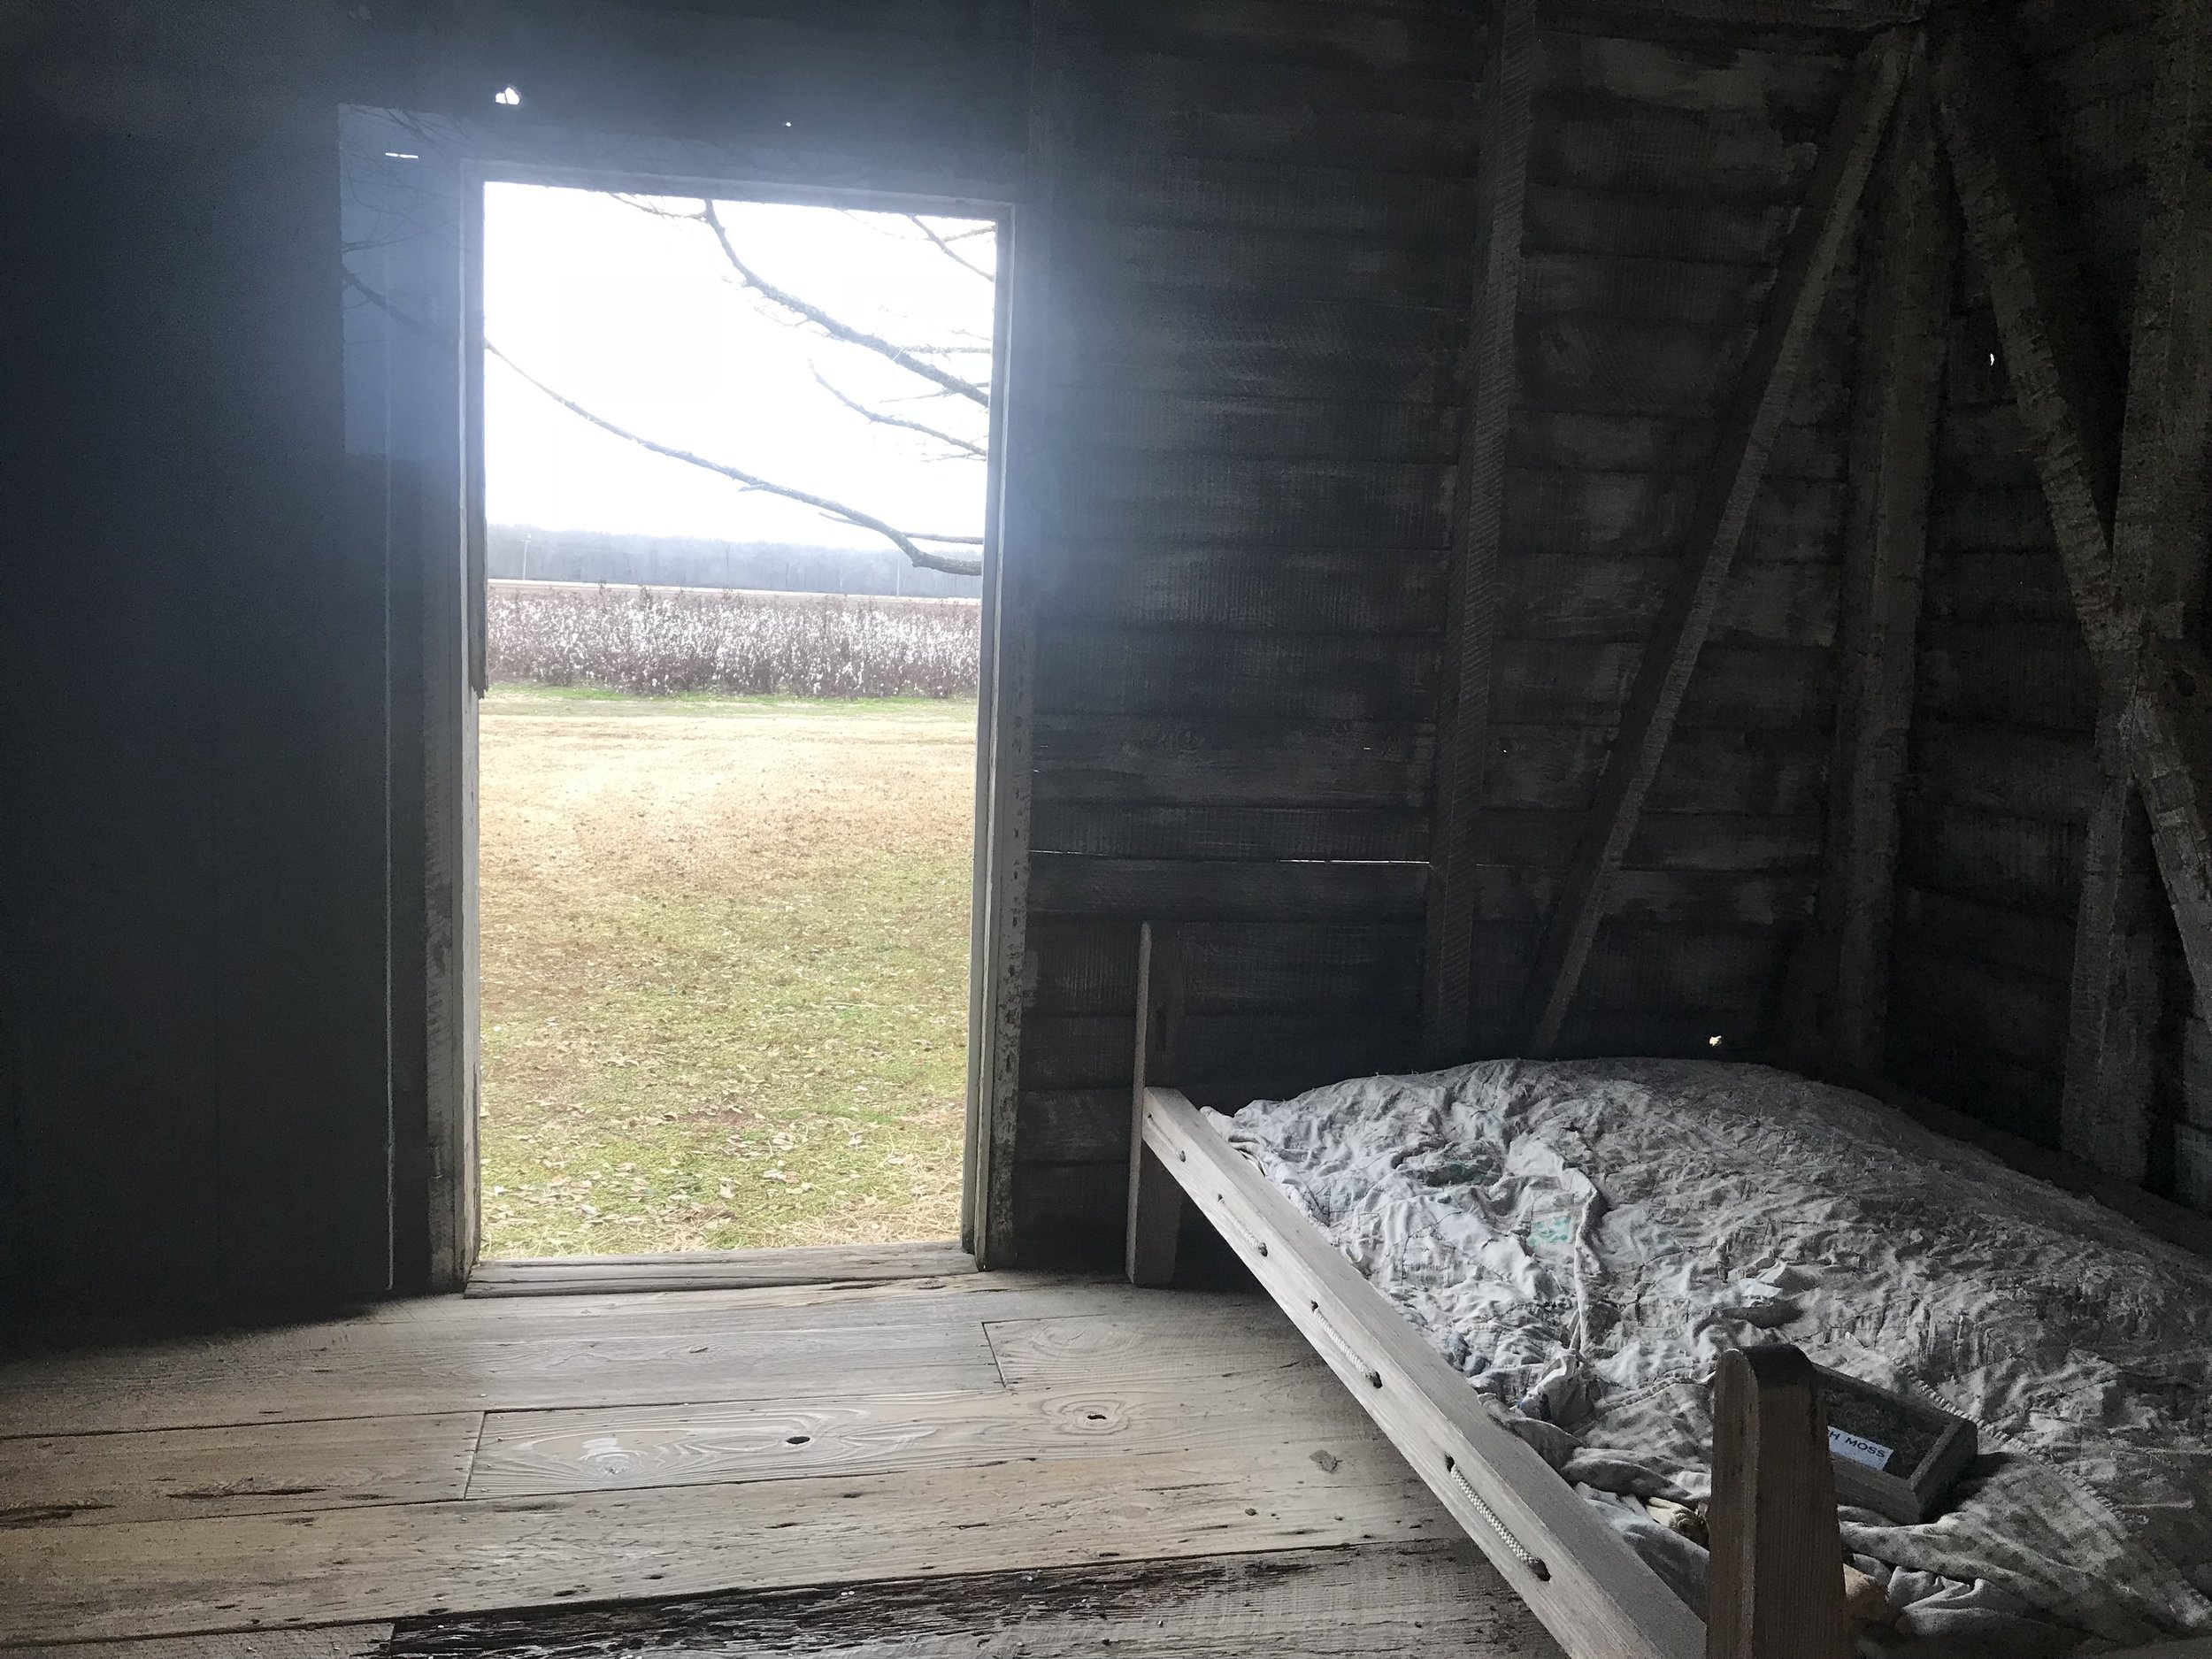  Cotton grows behind former slave quarters at Frogmore Plantation near Ferriday, Louisiana. The owners of the plantation leave some cotton unpicked so visitors in the off-season can see it.      